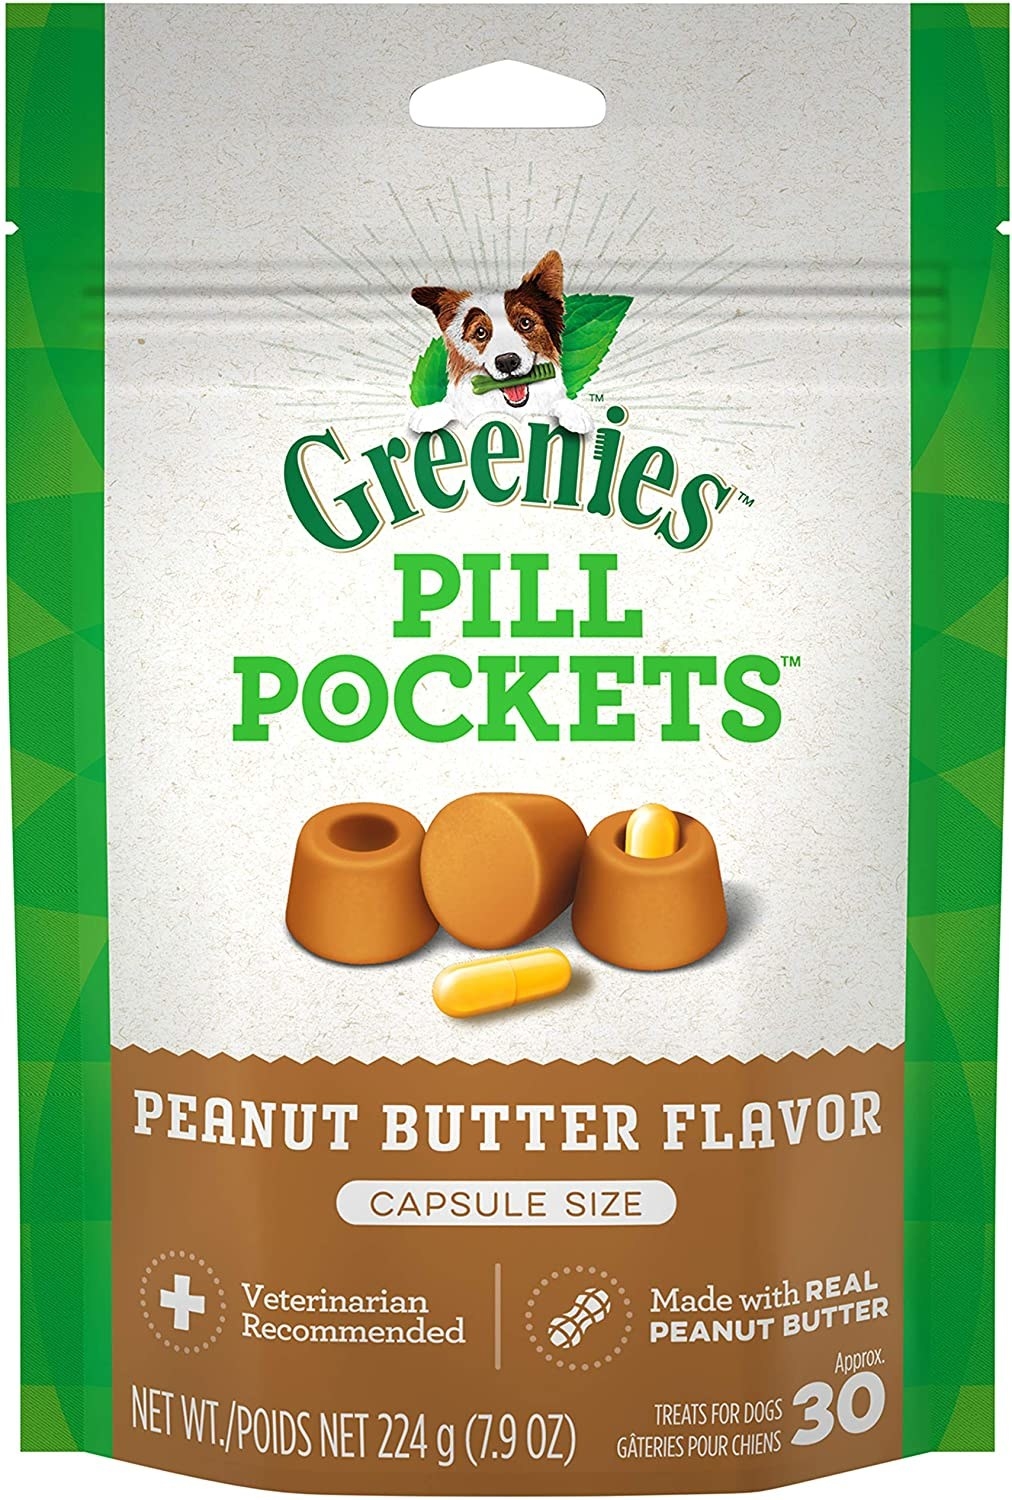 The bag of pill pockets